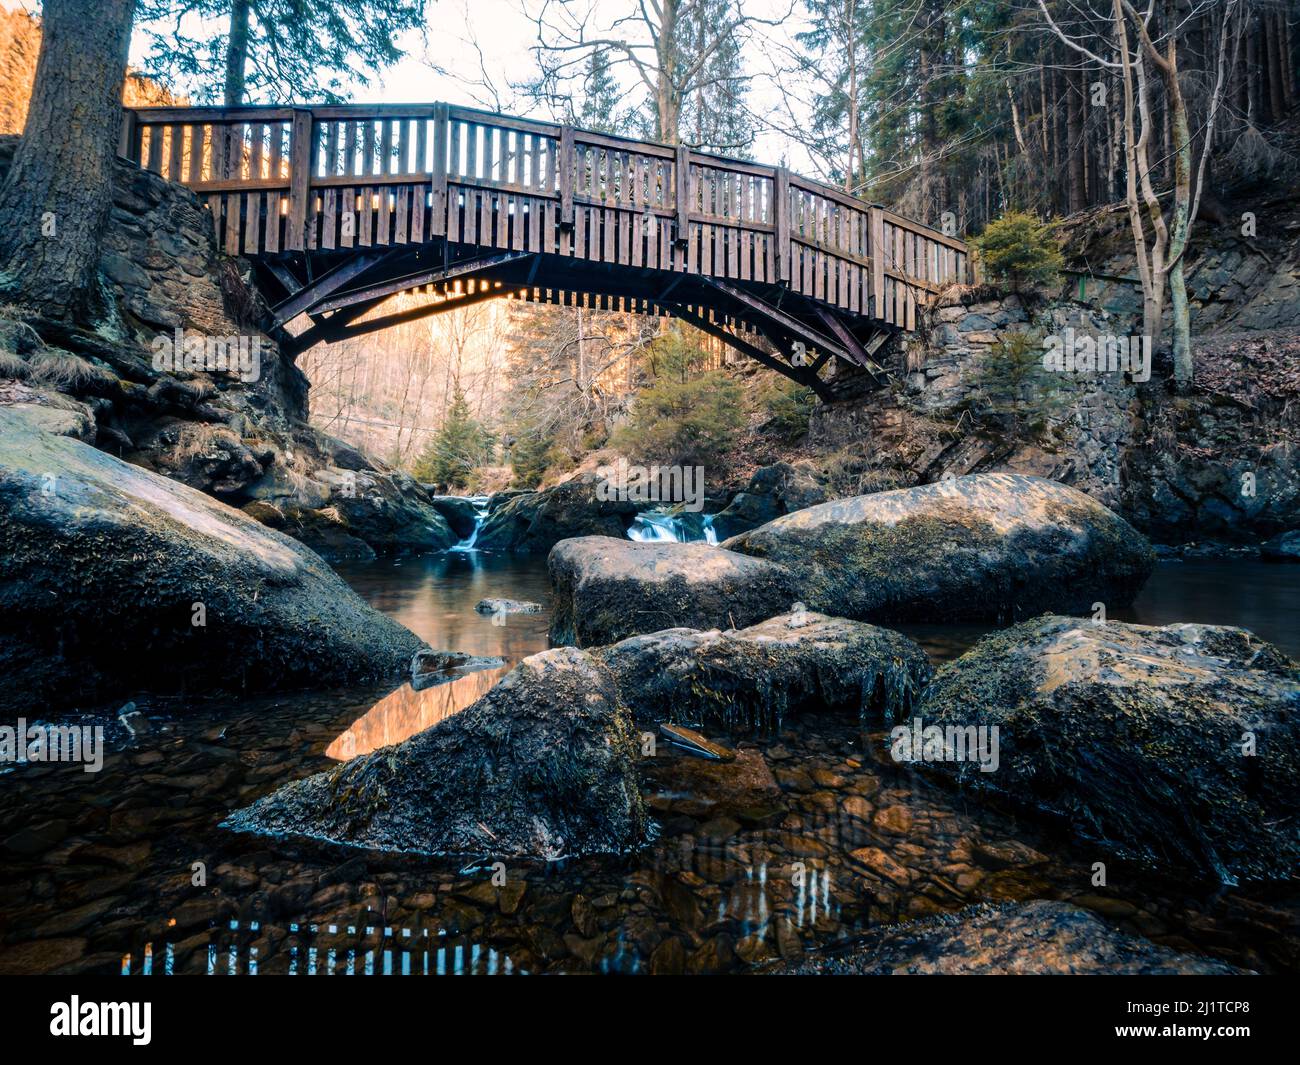 A beautiful shot of a wooden old bridge over a river with boulders in Verlobungsinsel, Okertal Harz, Germany Stock Photo